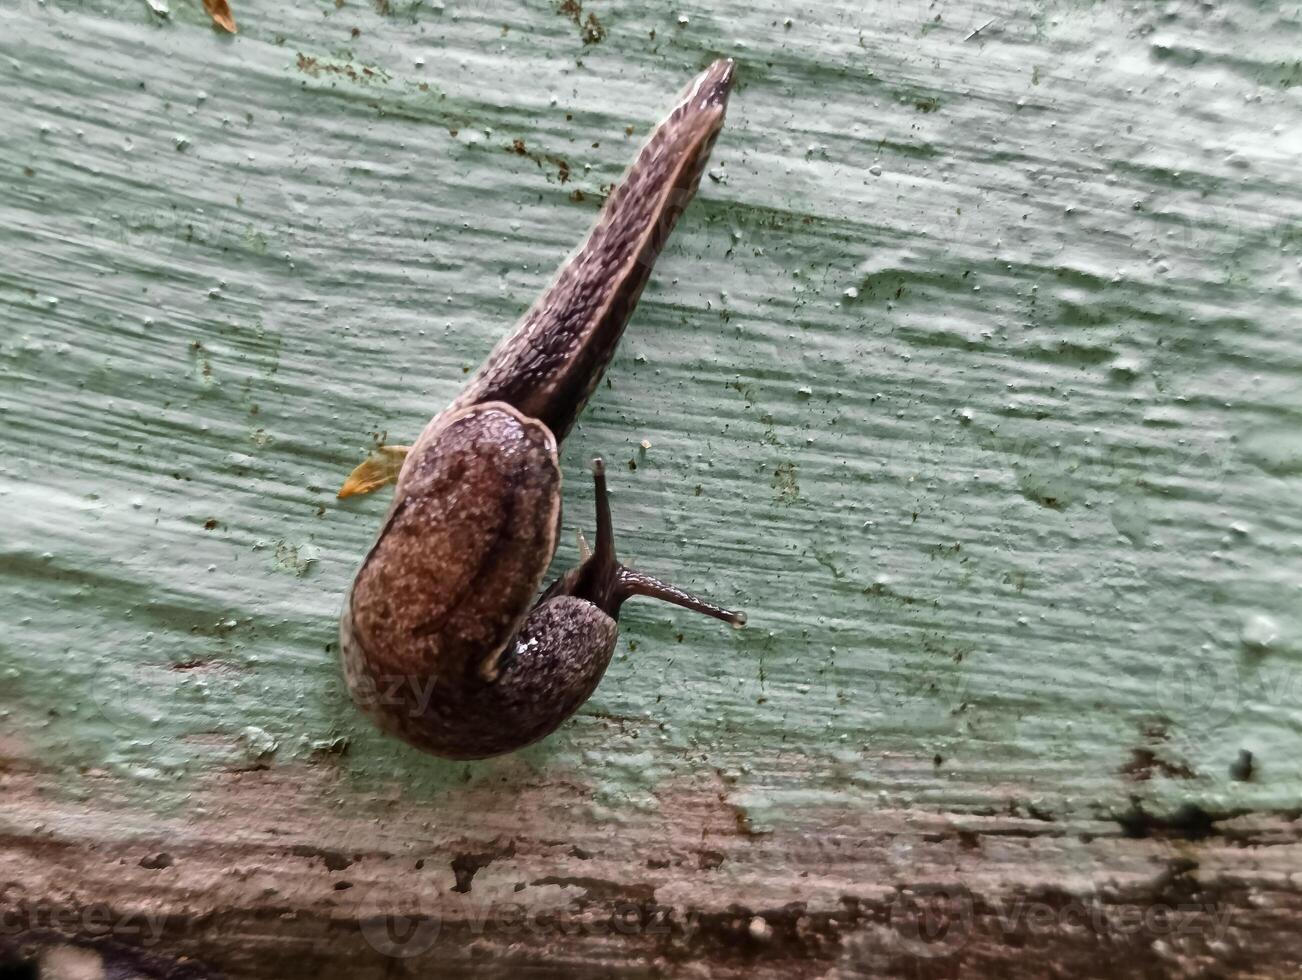 A naked snail without a shell is walking photo